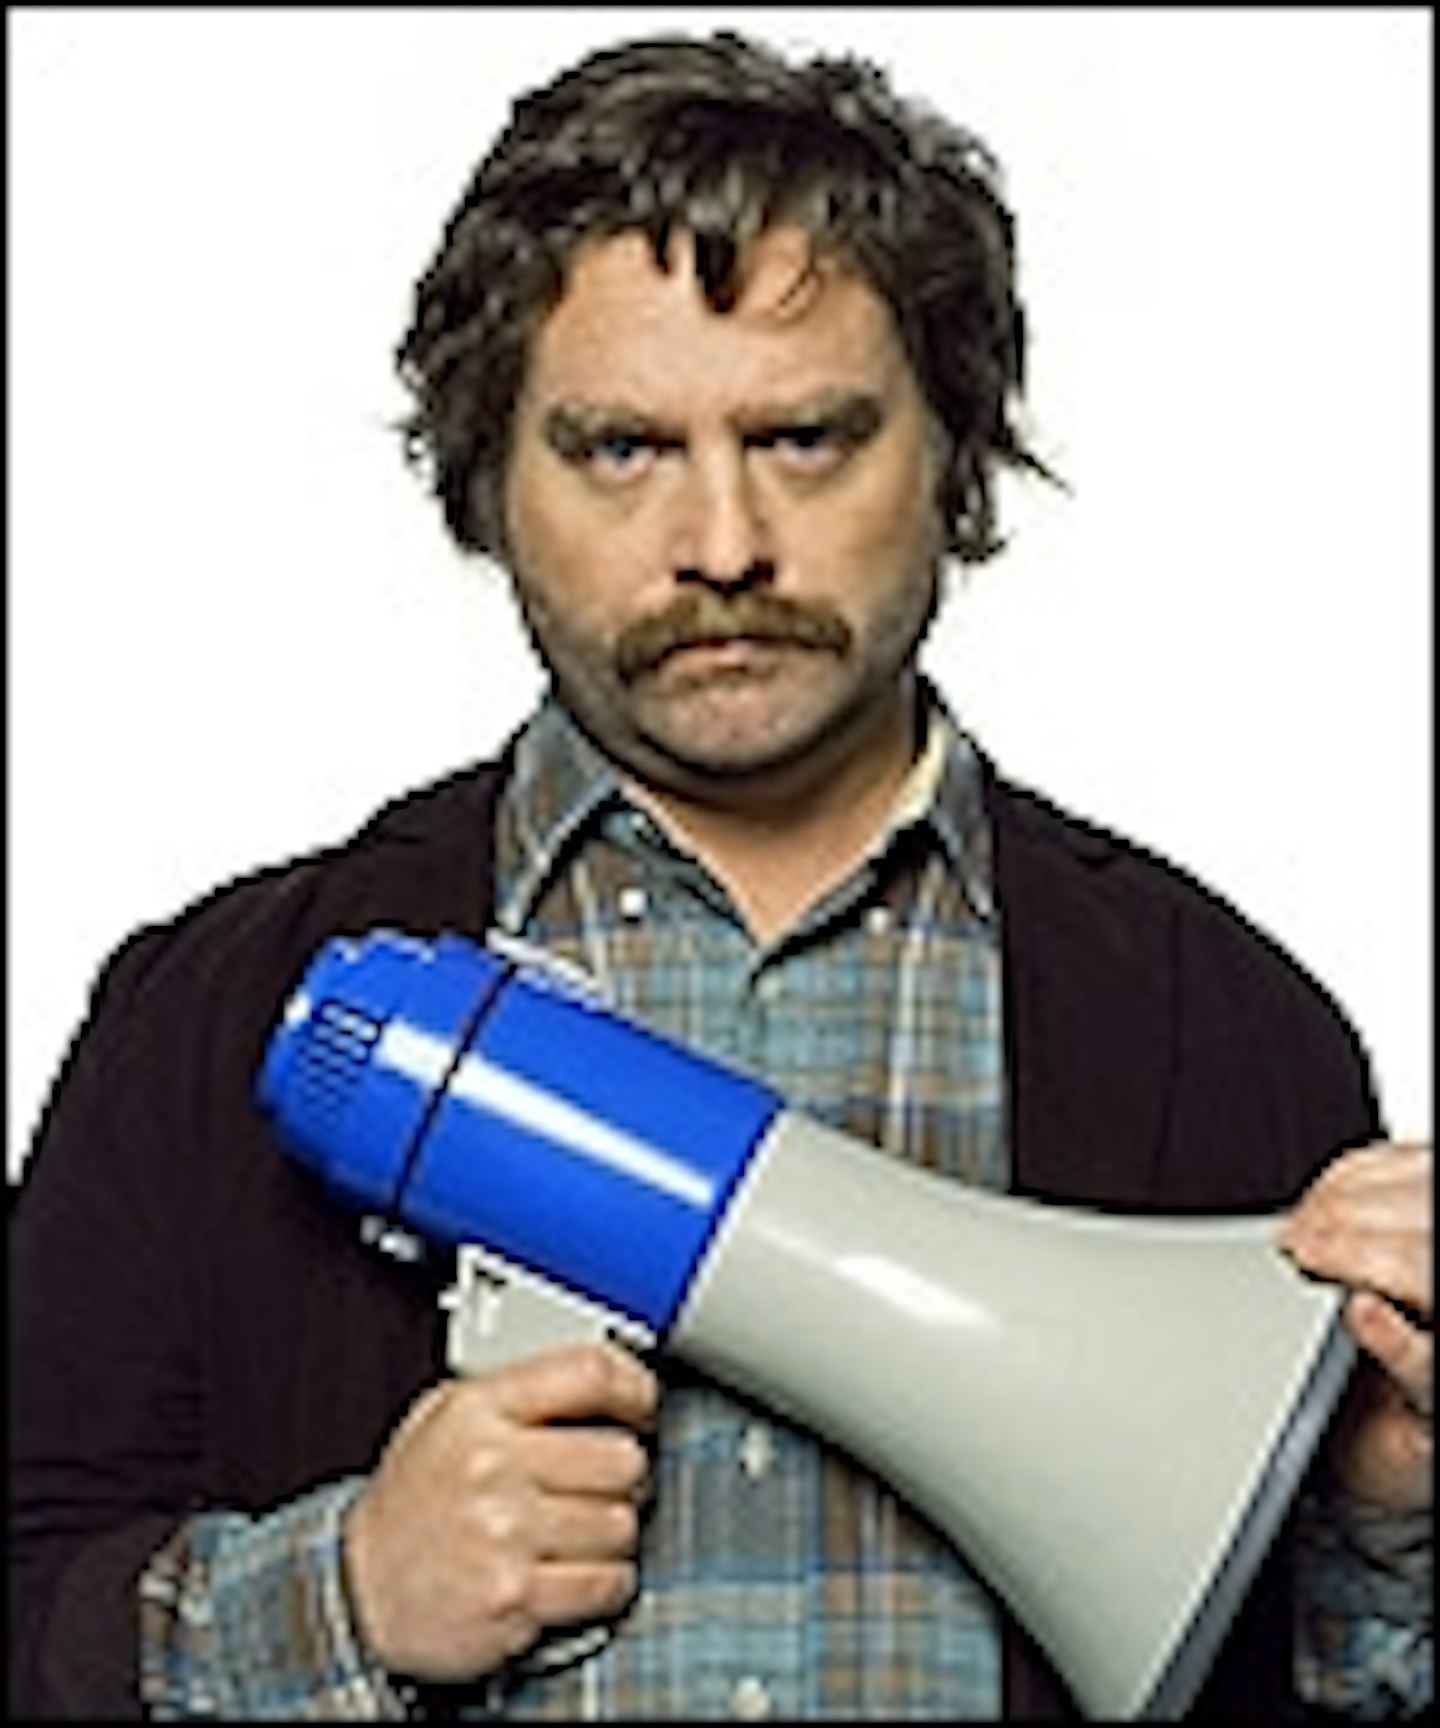 Galifianakis Could Lead Dunces